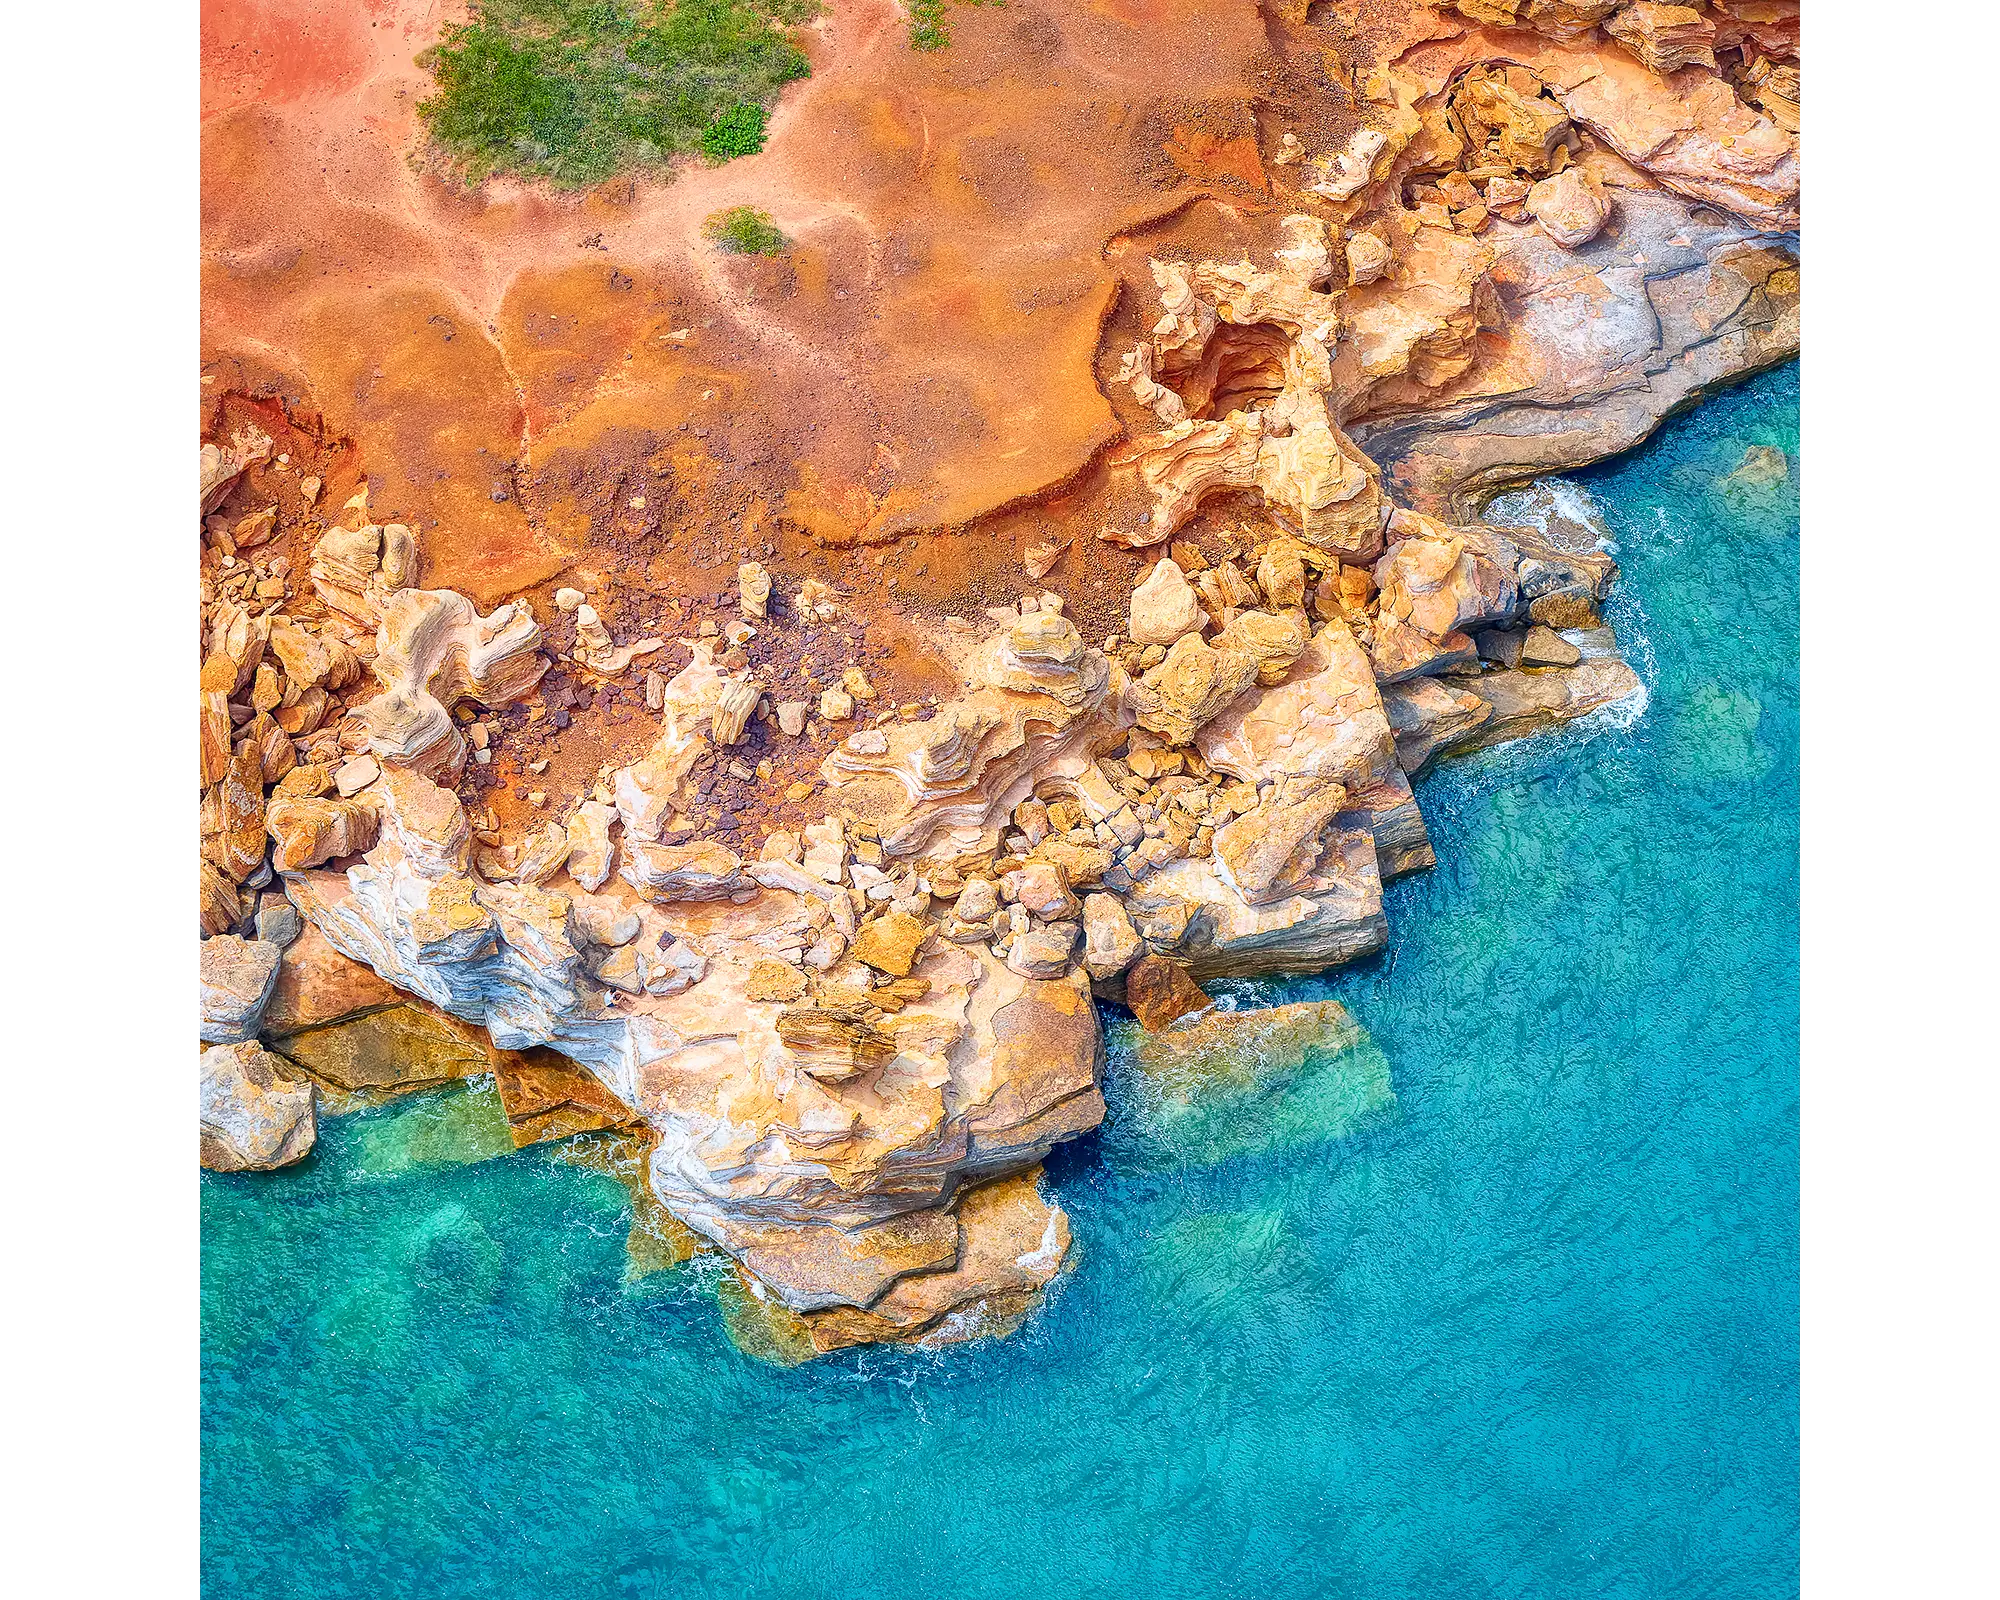 Gantheaume Point viewed from above Broome, Western Australia.